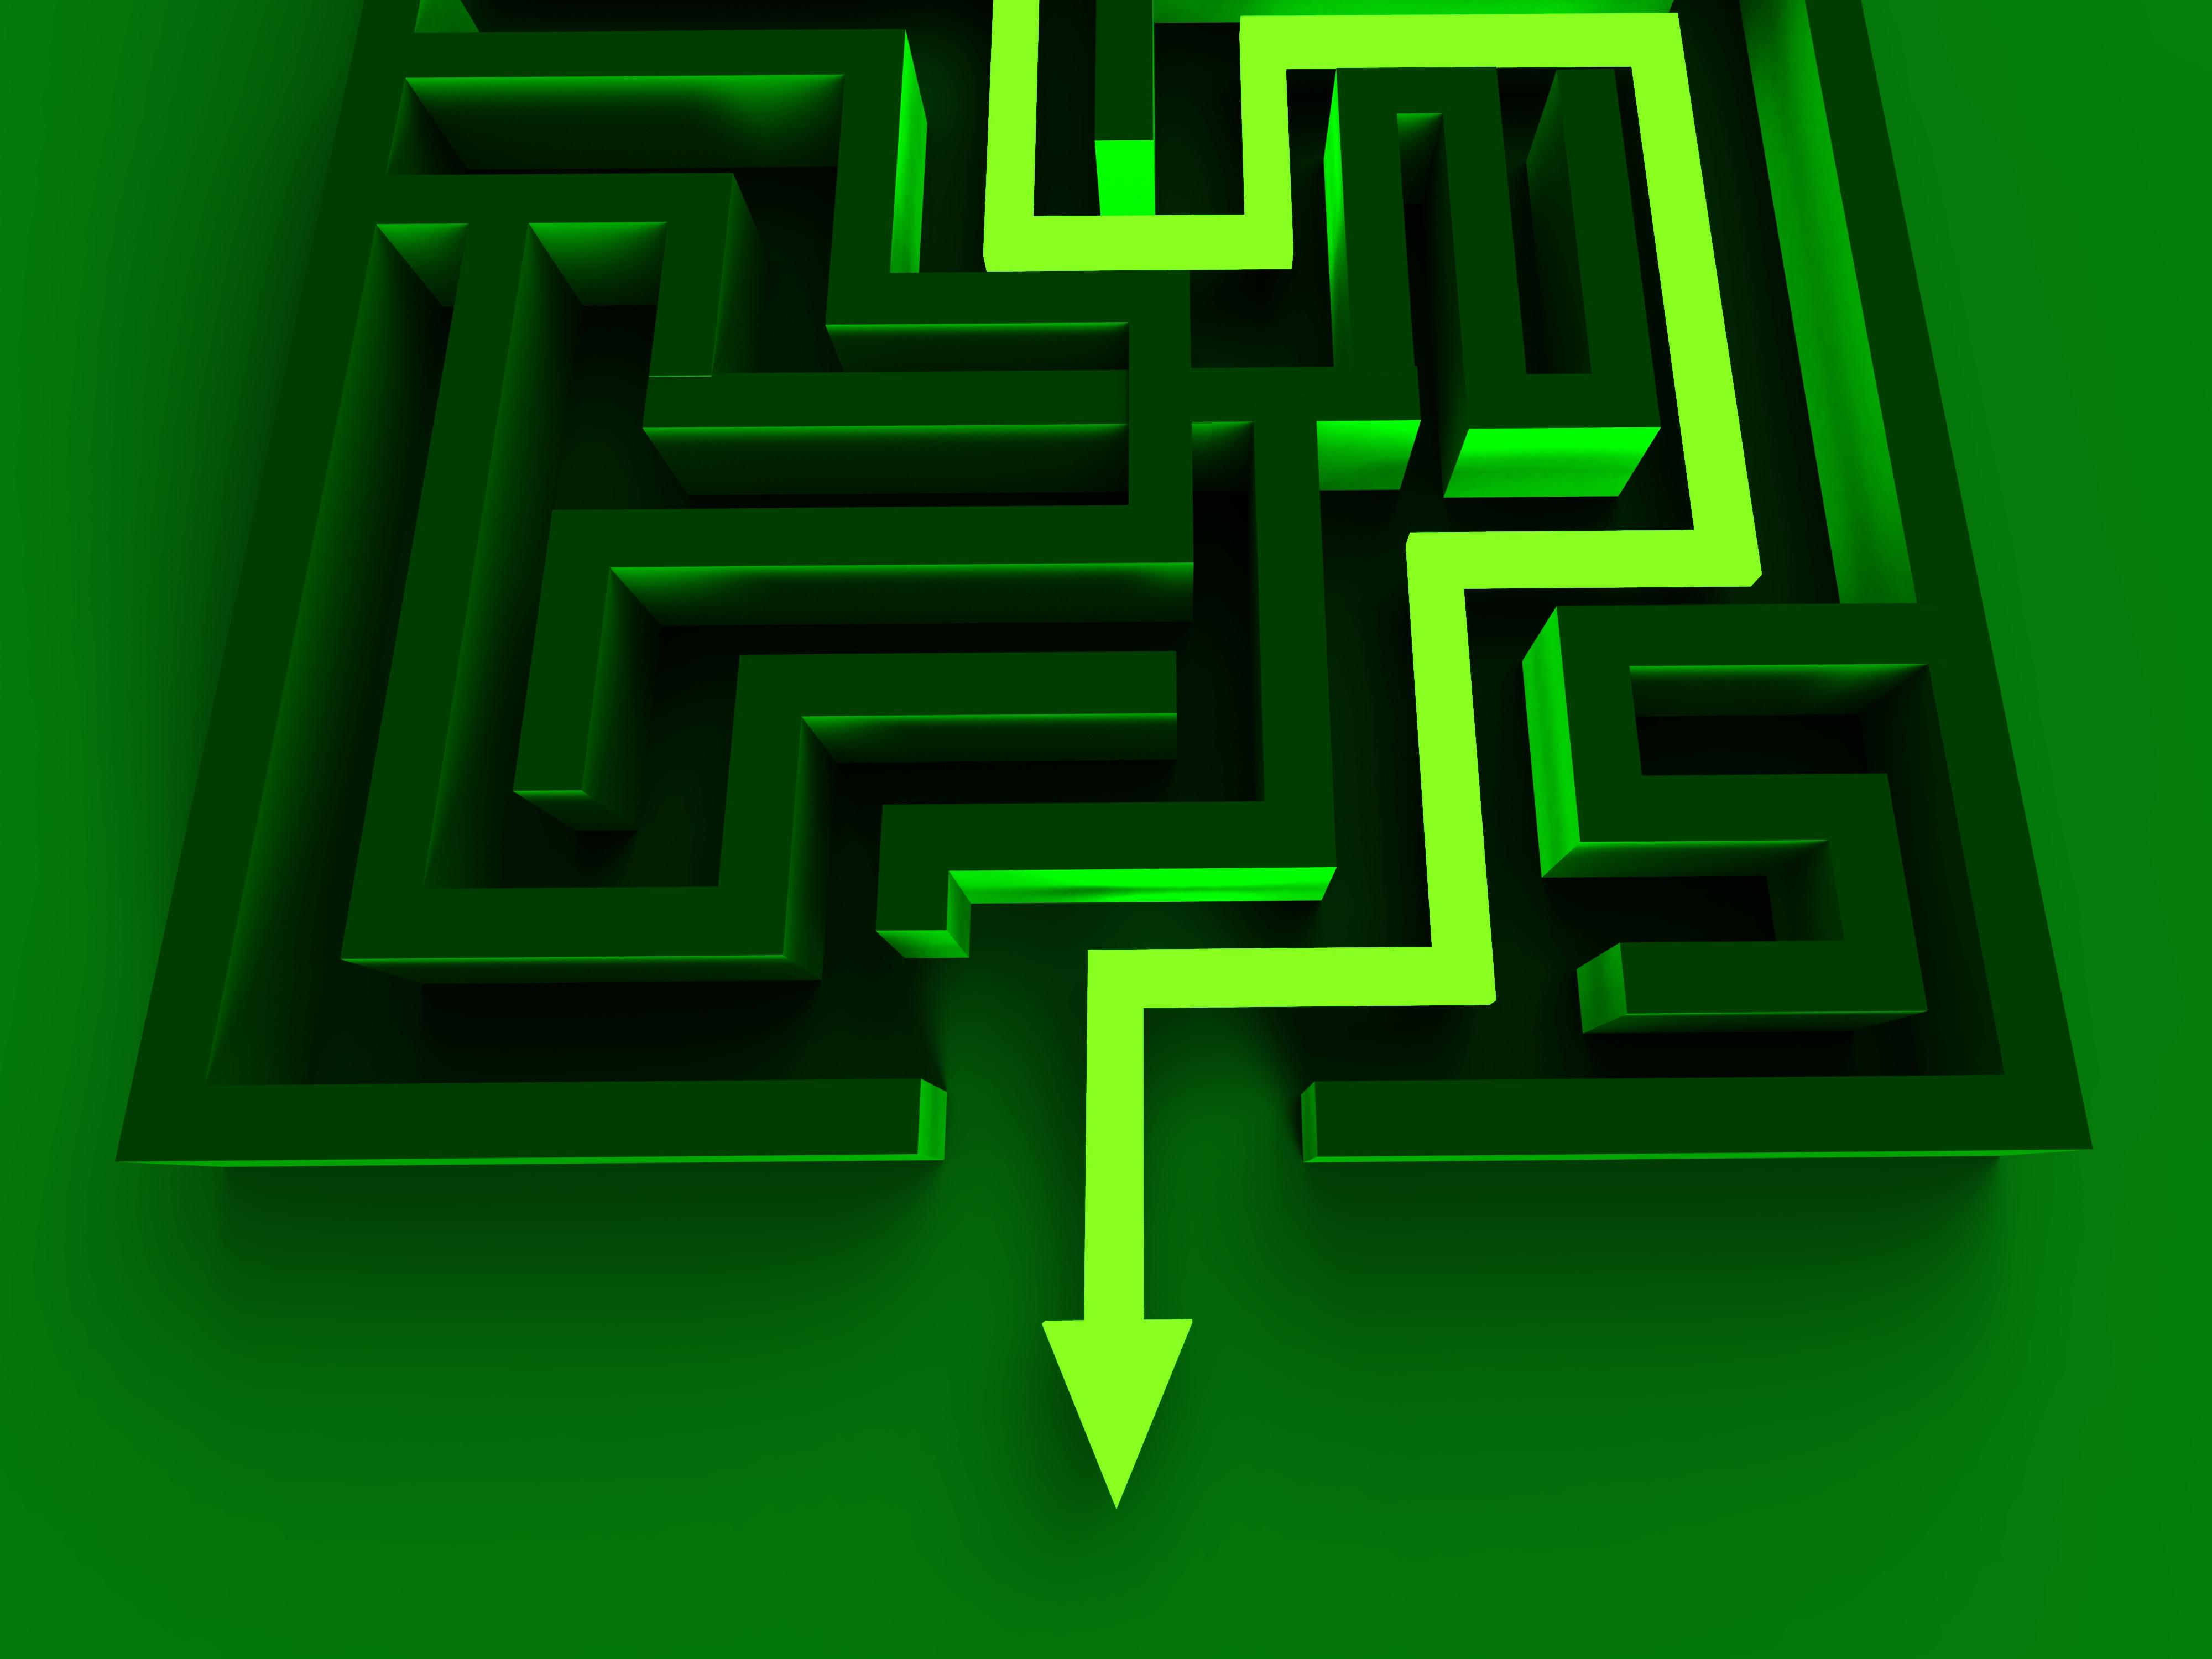 To Move Fast, Quantum Maze Solvers Must Forget the Past